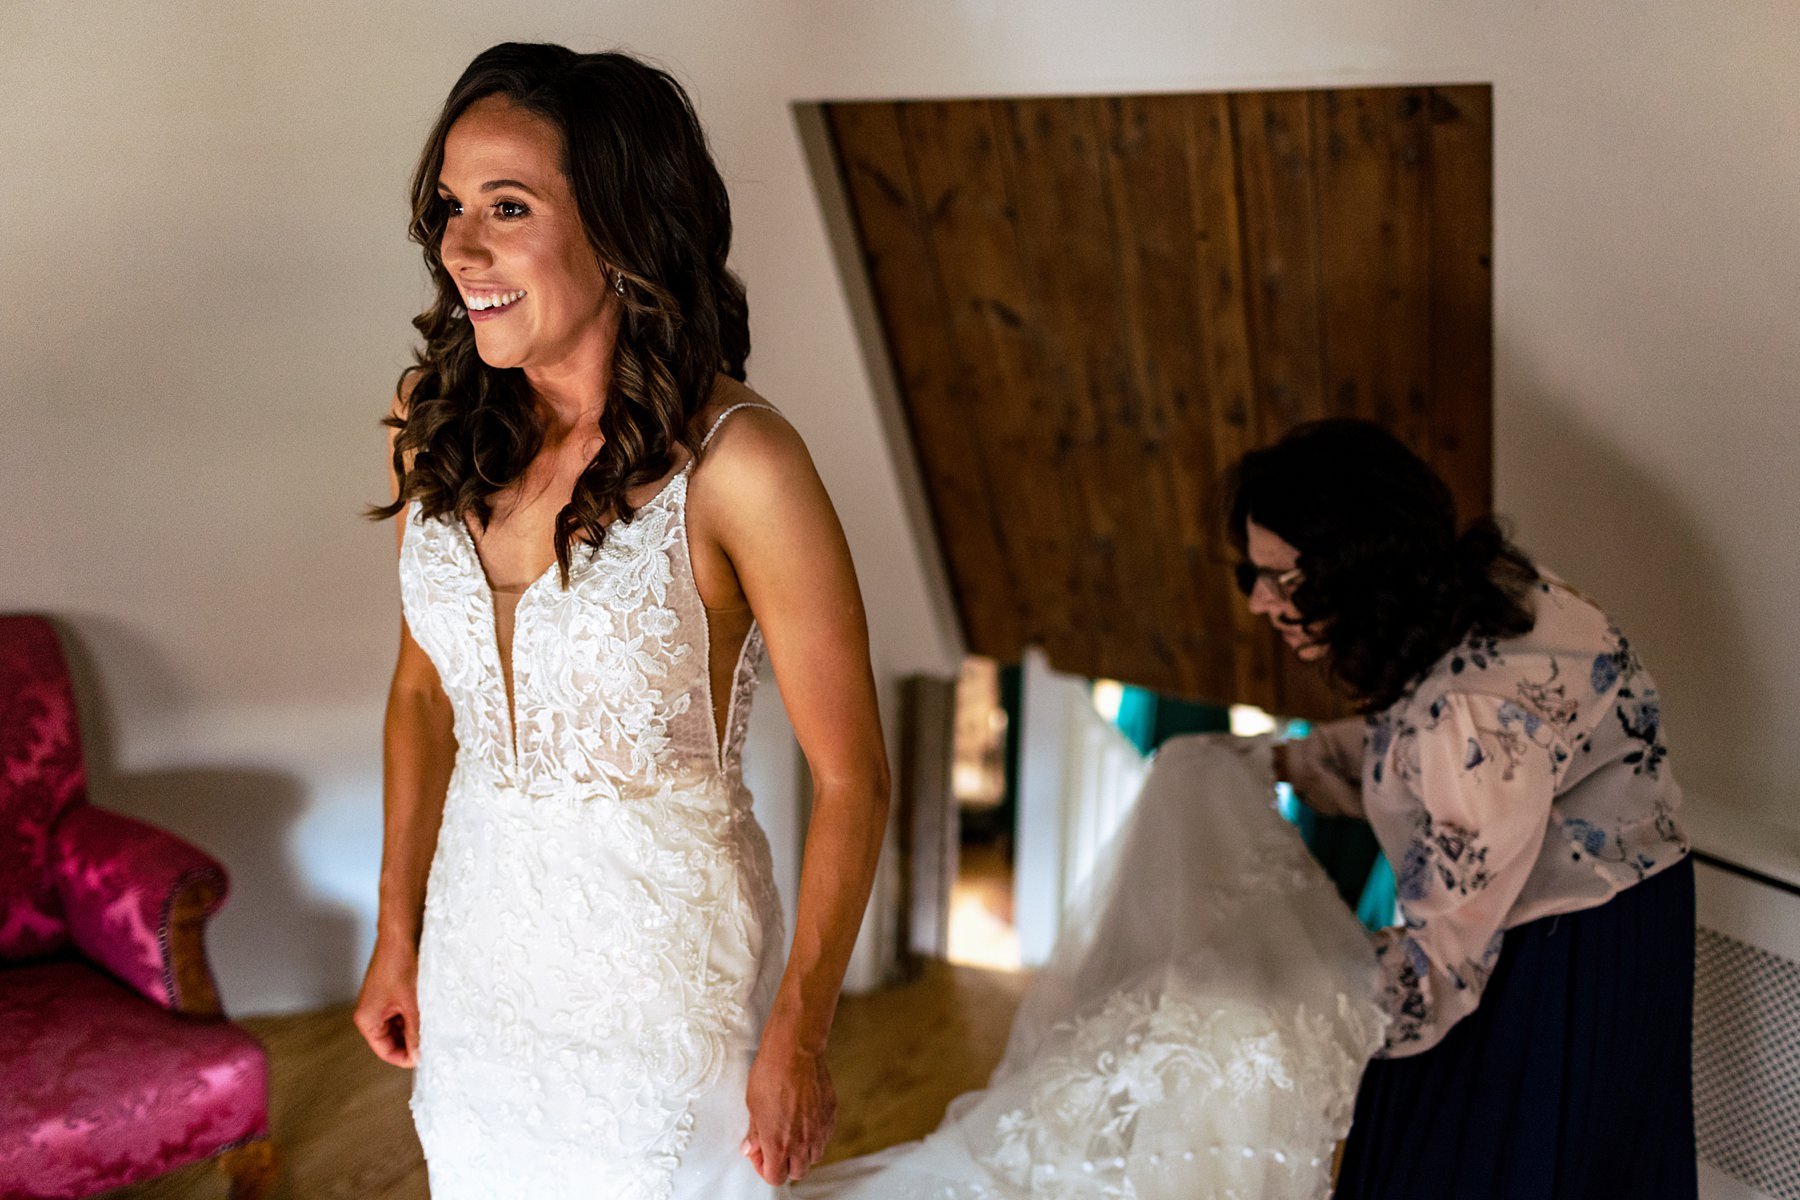 A bride smiling after she just got into her sleeveless wedding dress.